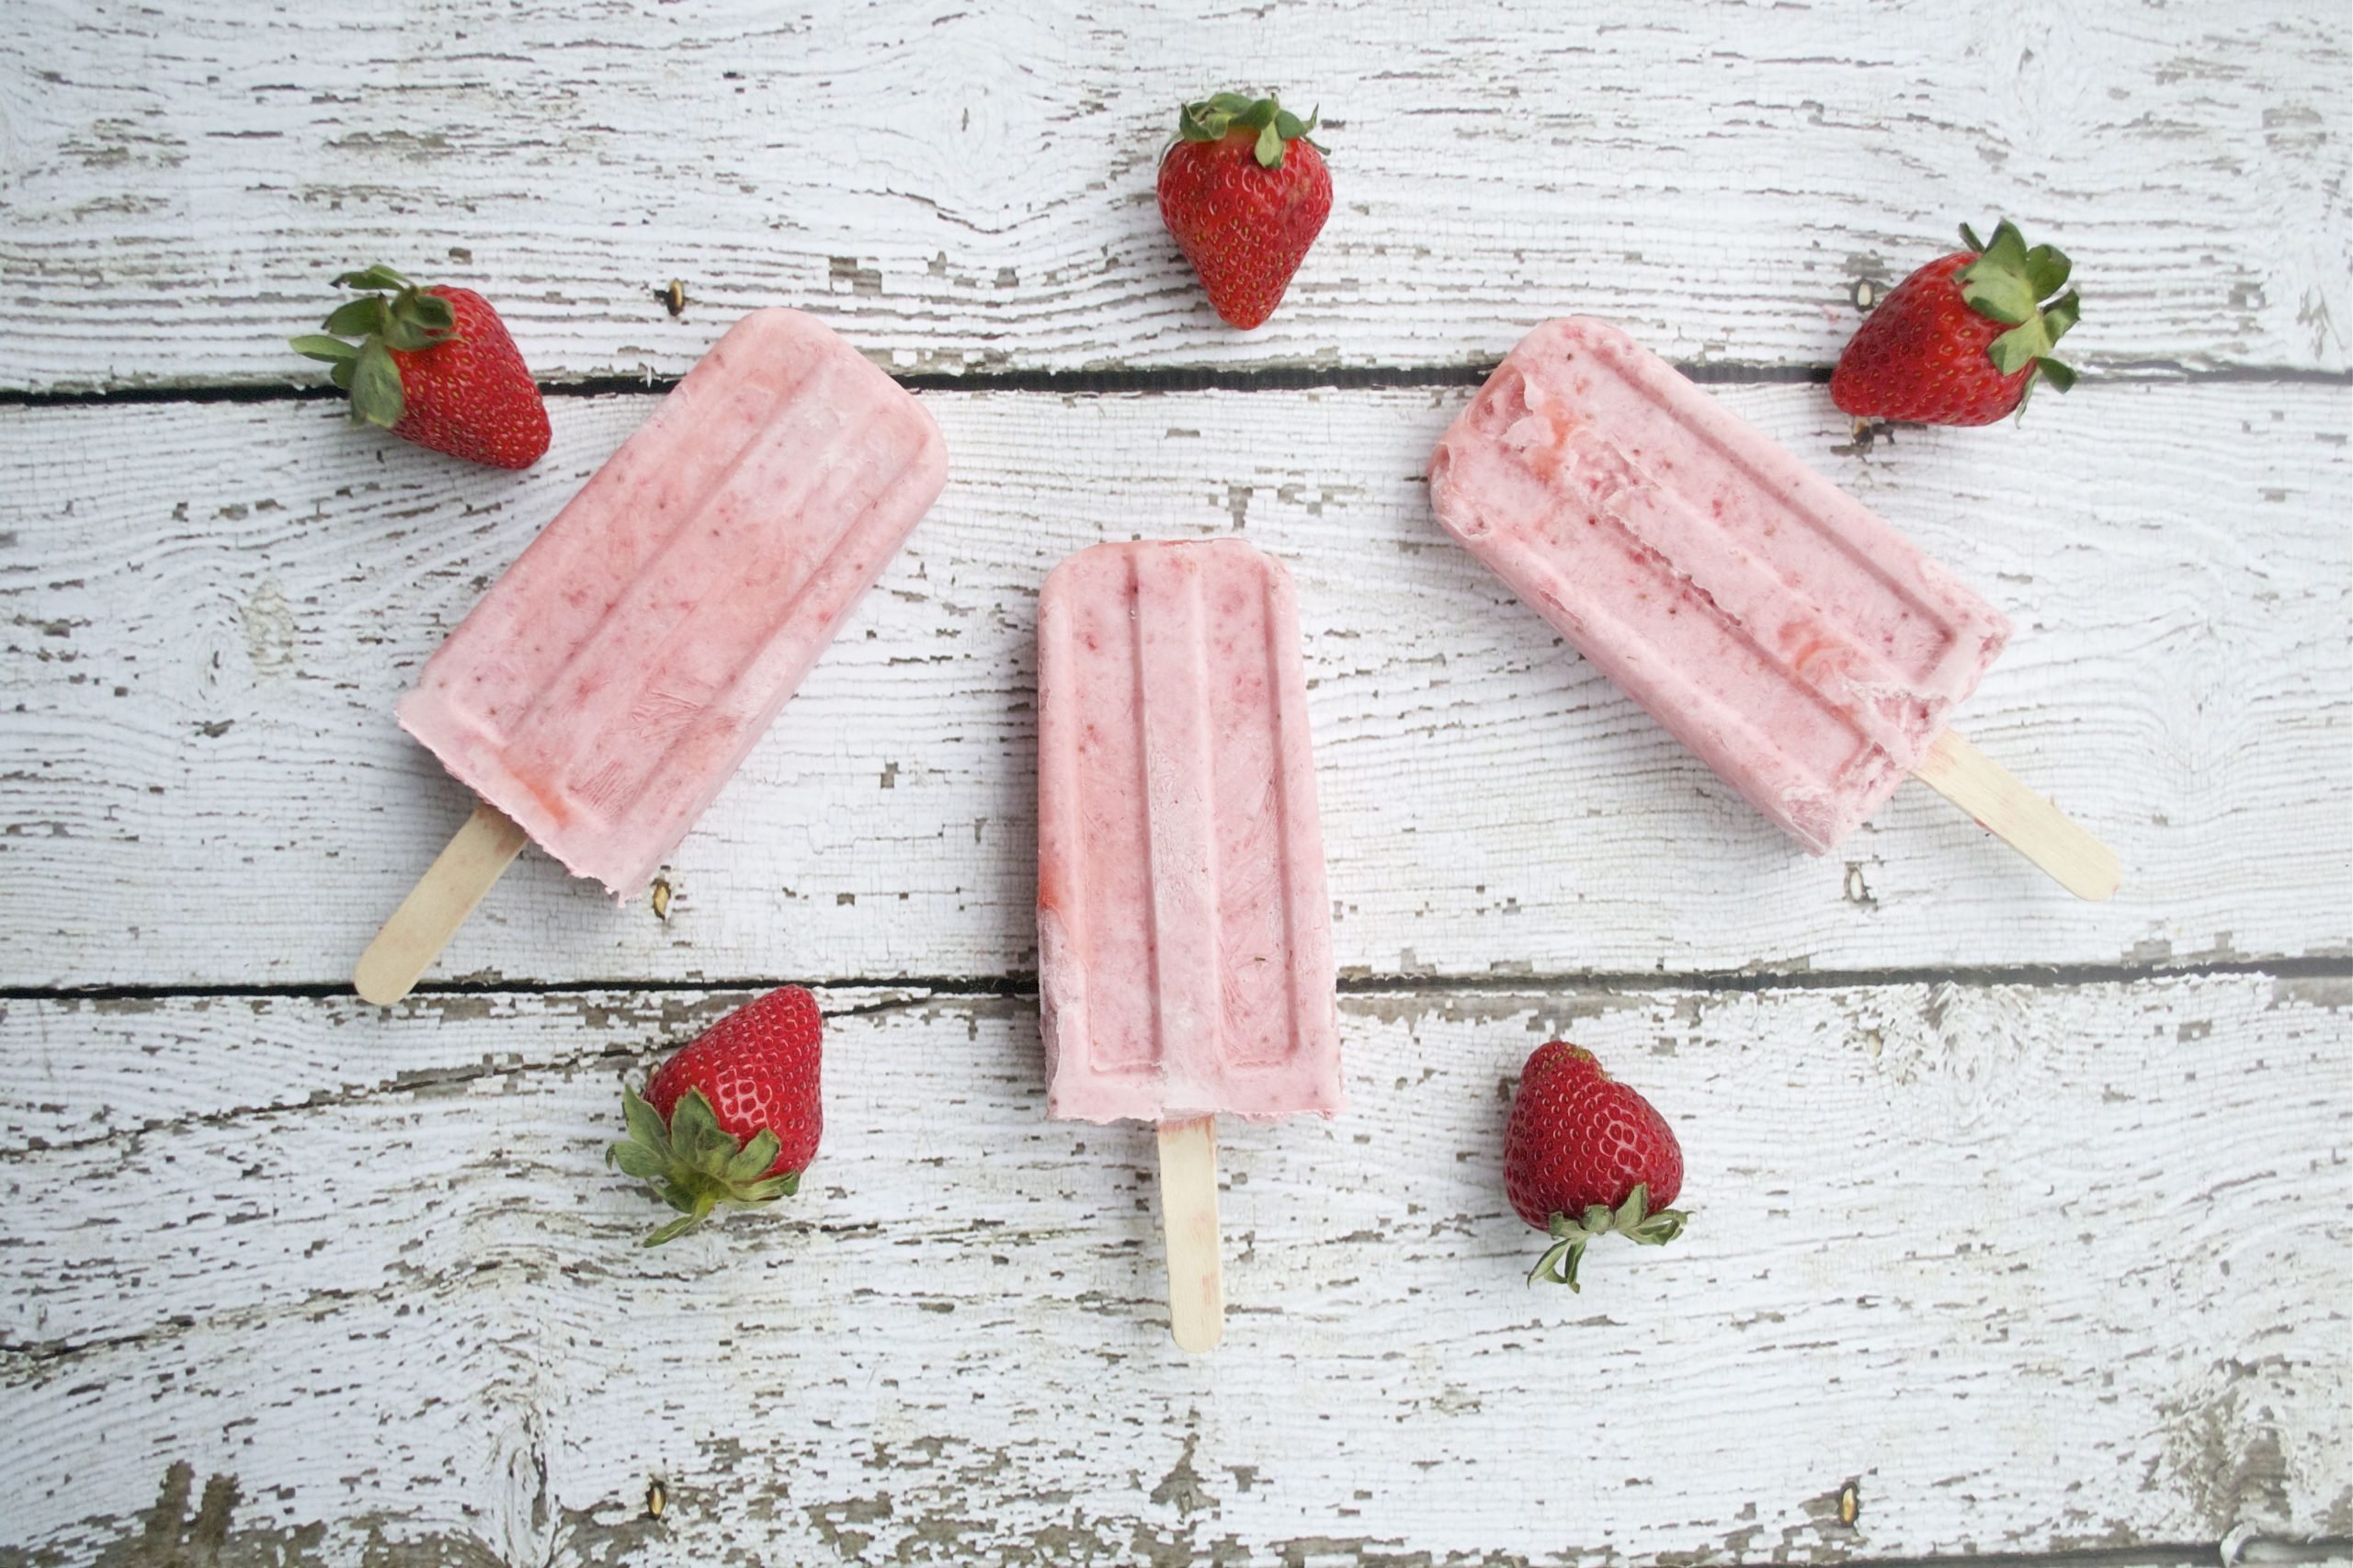 Strawberries and Cream Popsicles (GF, DF, SF, V)